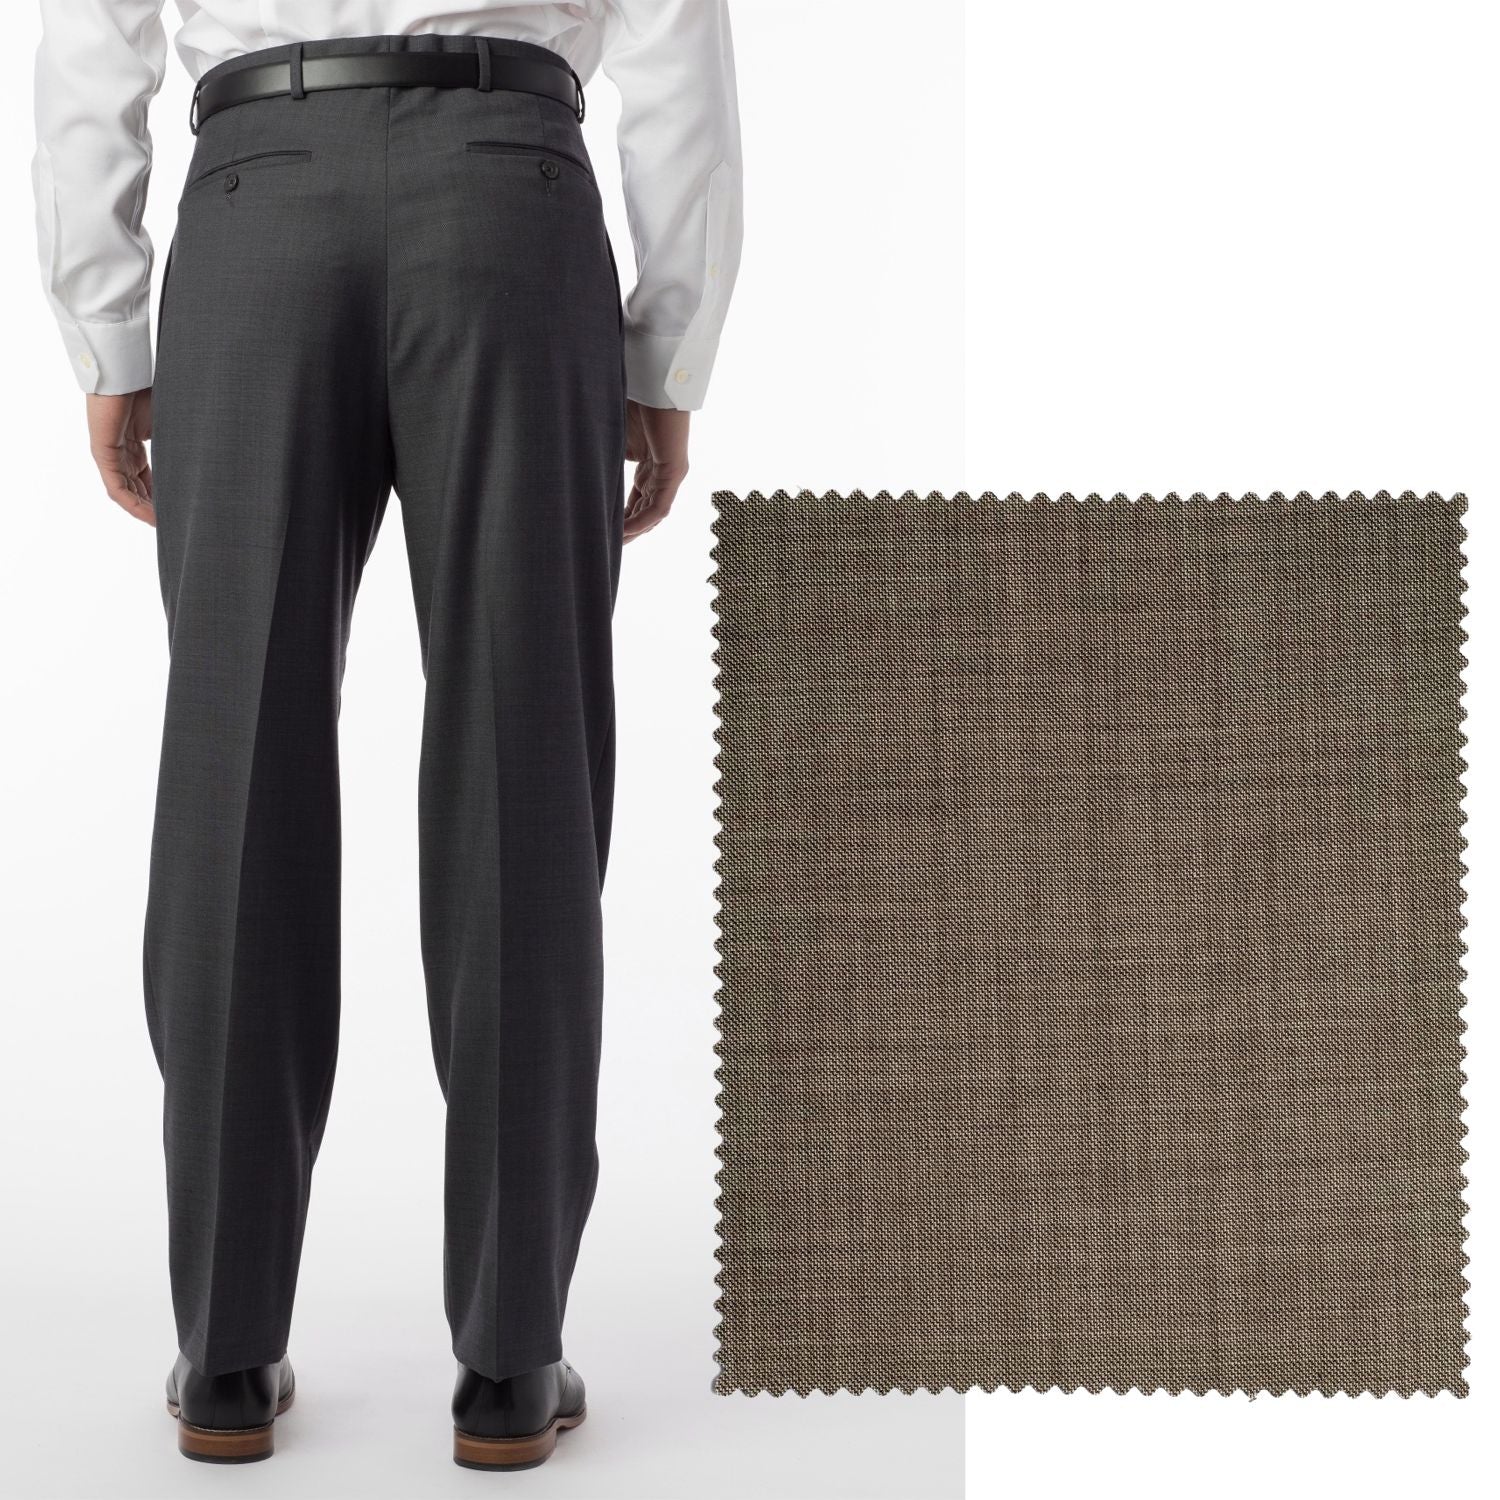 BIG FIT Sharkskin Super 120s Worsted Wool Comfort-EZE Trouser in Light Brown (Manchester Pleated Model) by Ballin